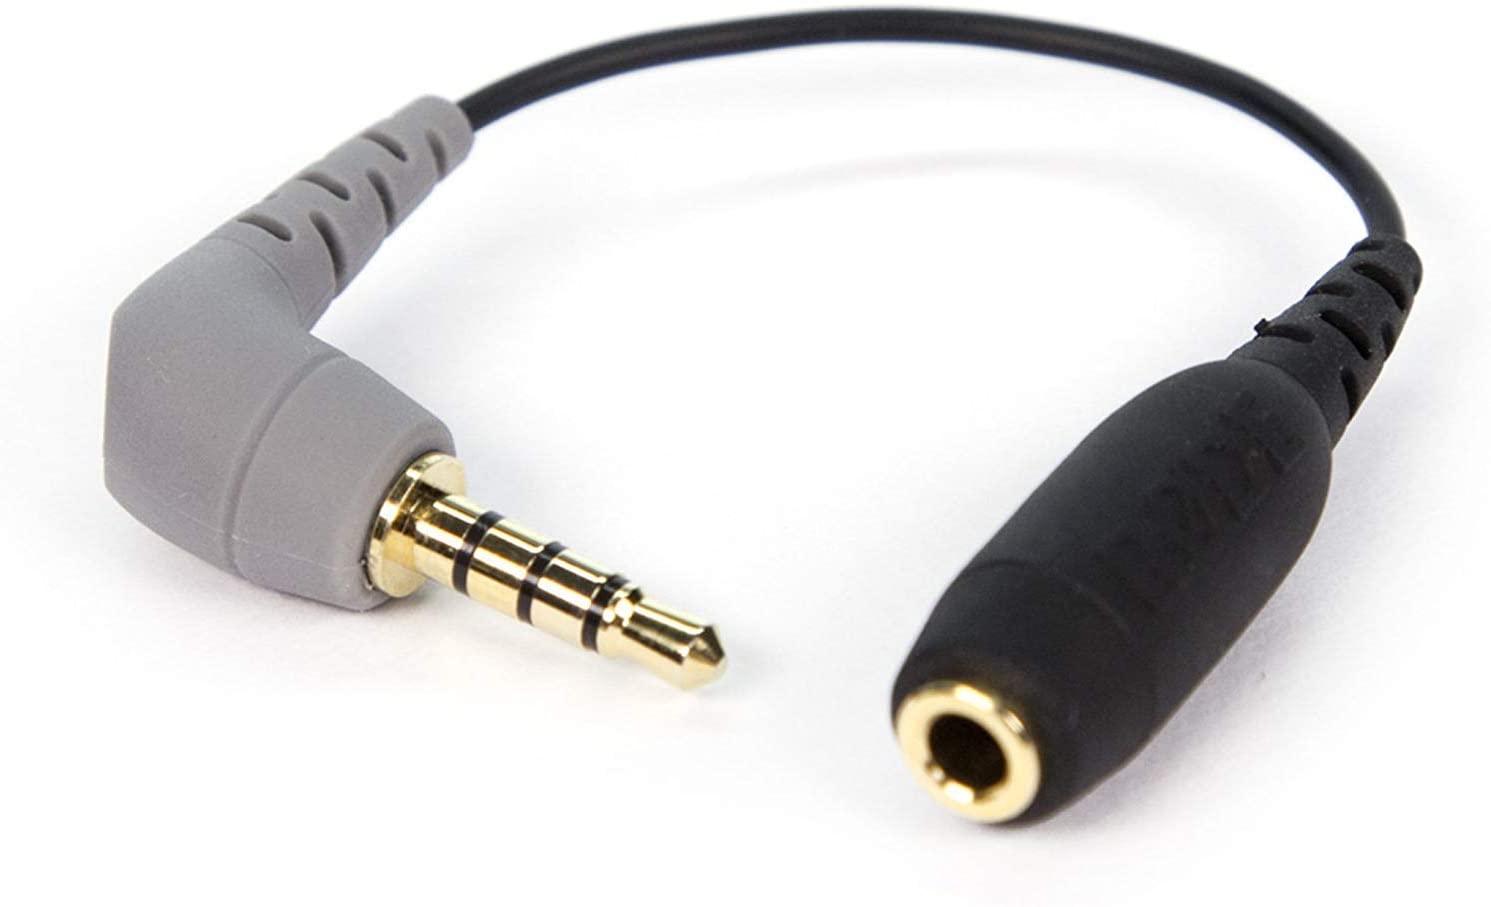 Adapter for Audiorecording with Smartphone